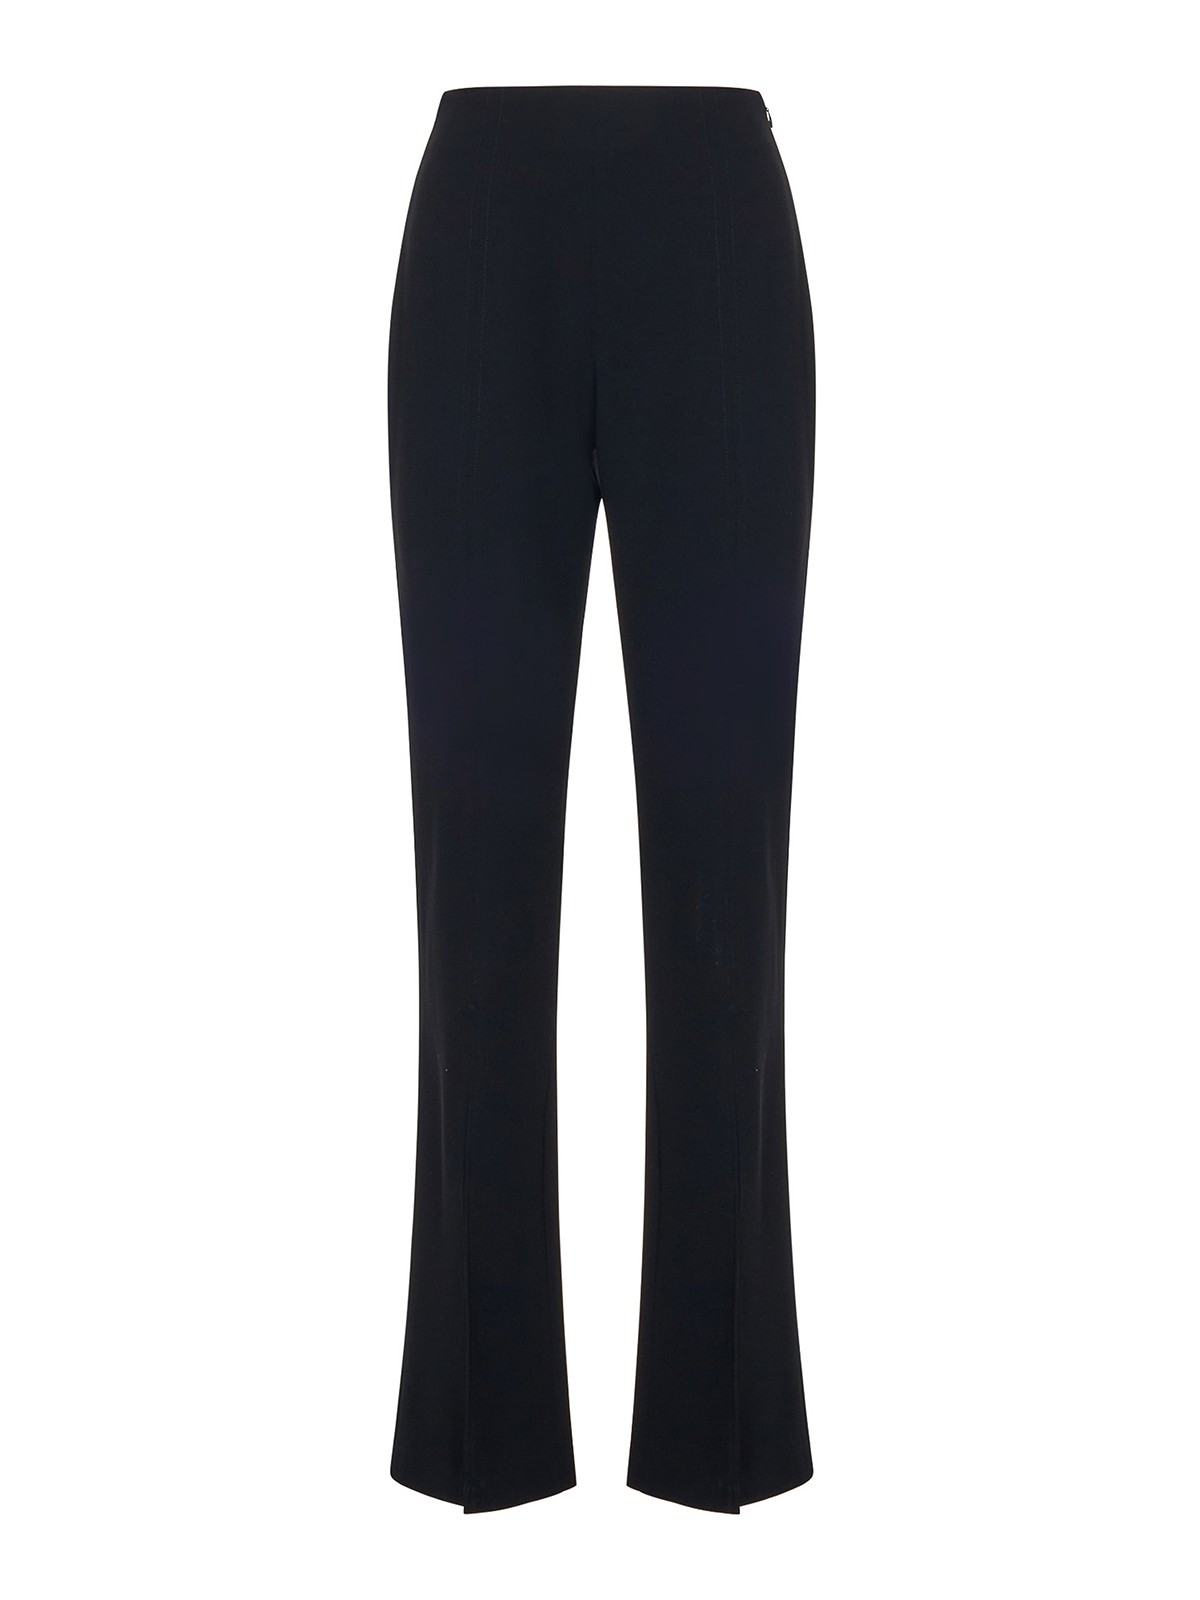 AMEN HIGH-WAISTED BLACK CREPE TROUSERS